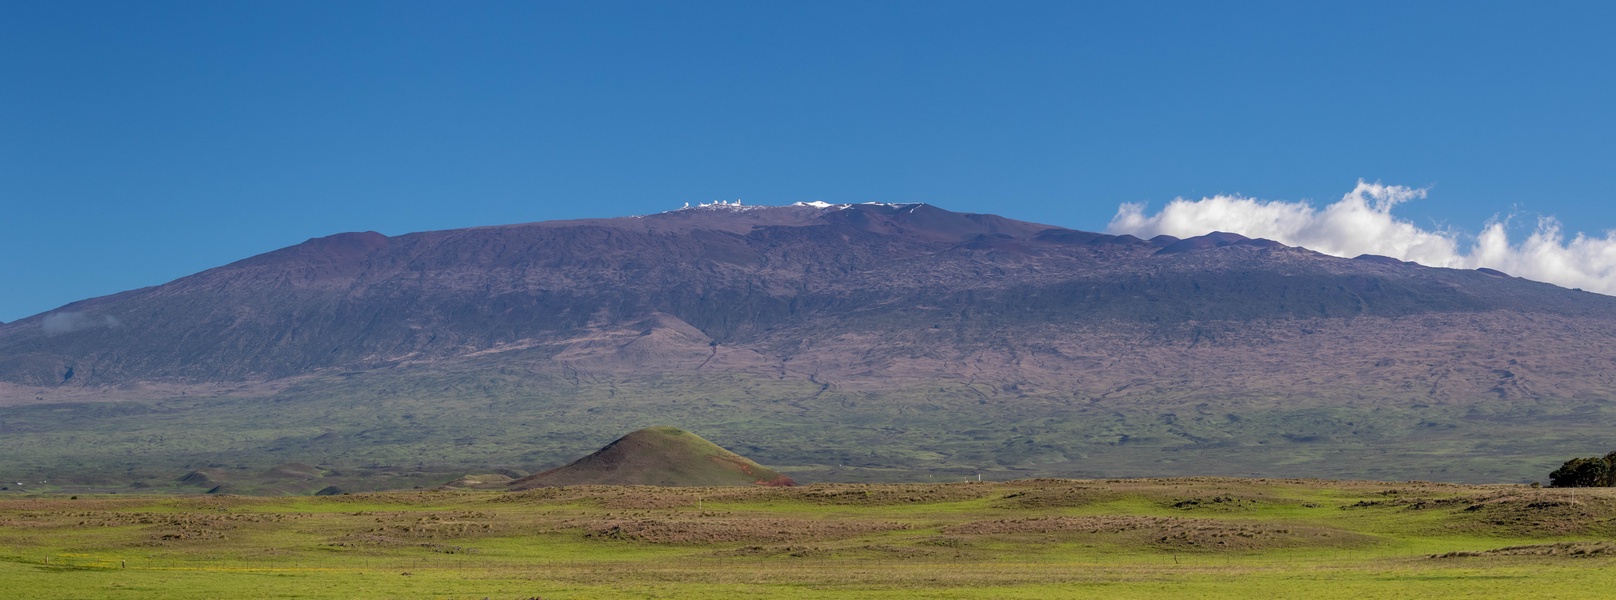 Stunning View of Sno-Capped Mauna Kea from Waimea, Just Up the Hill!